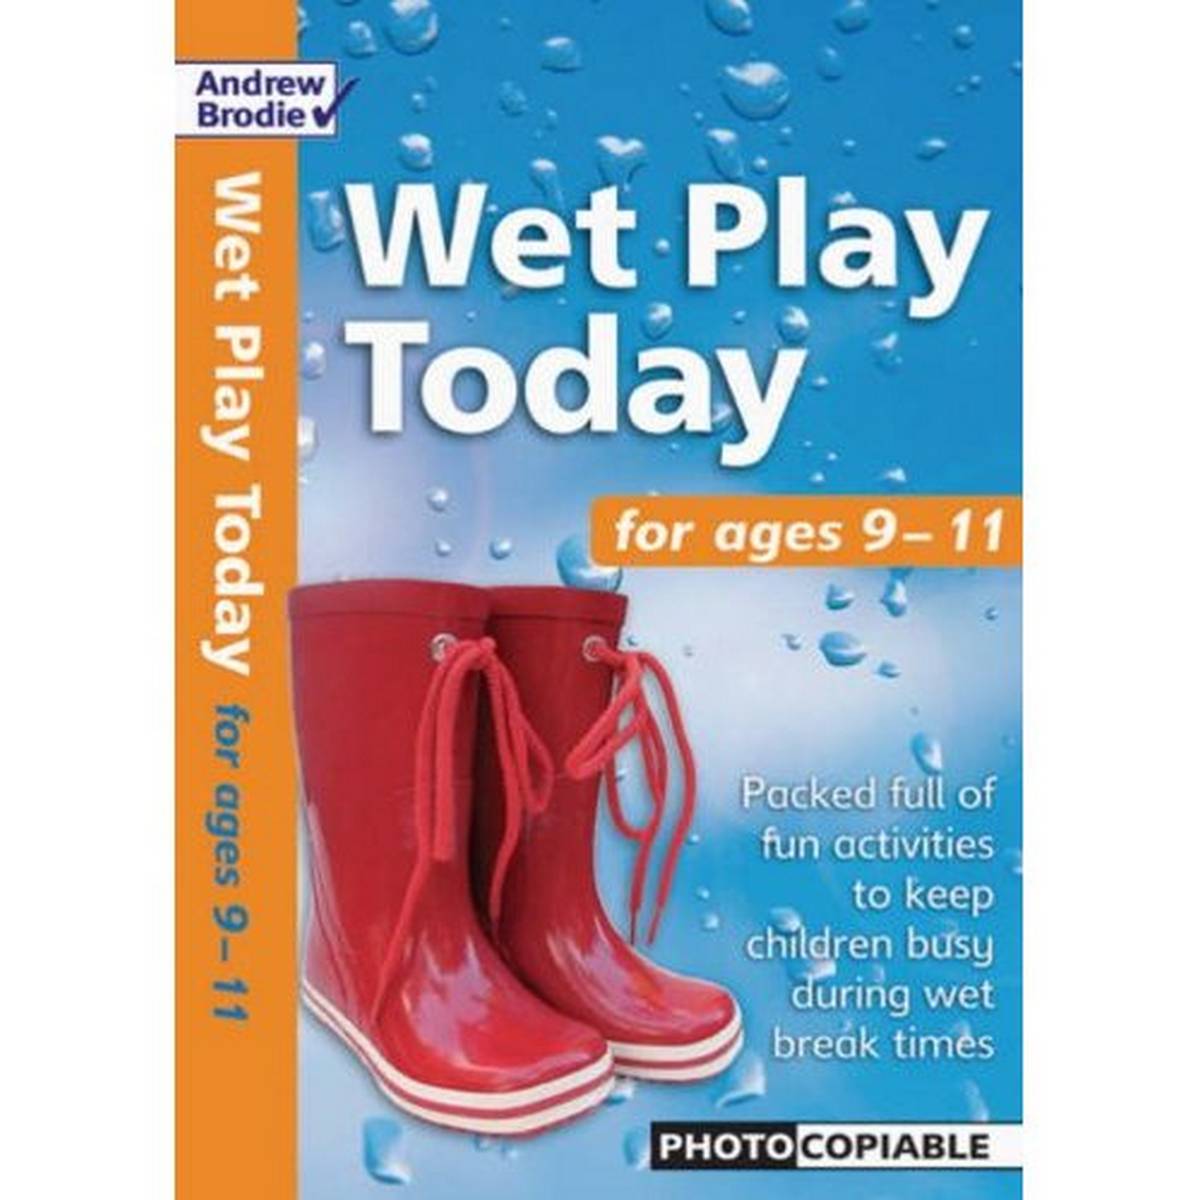 Wet Play Today for ages 9-11